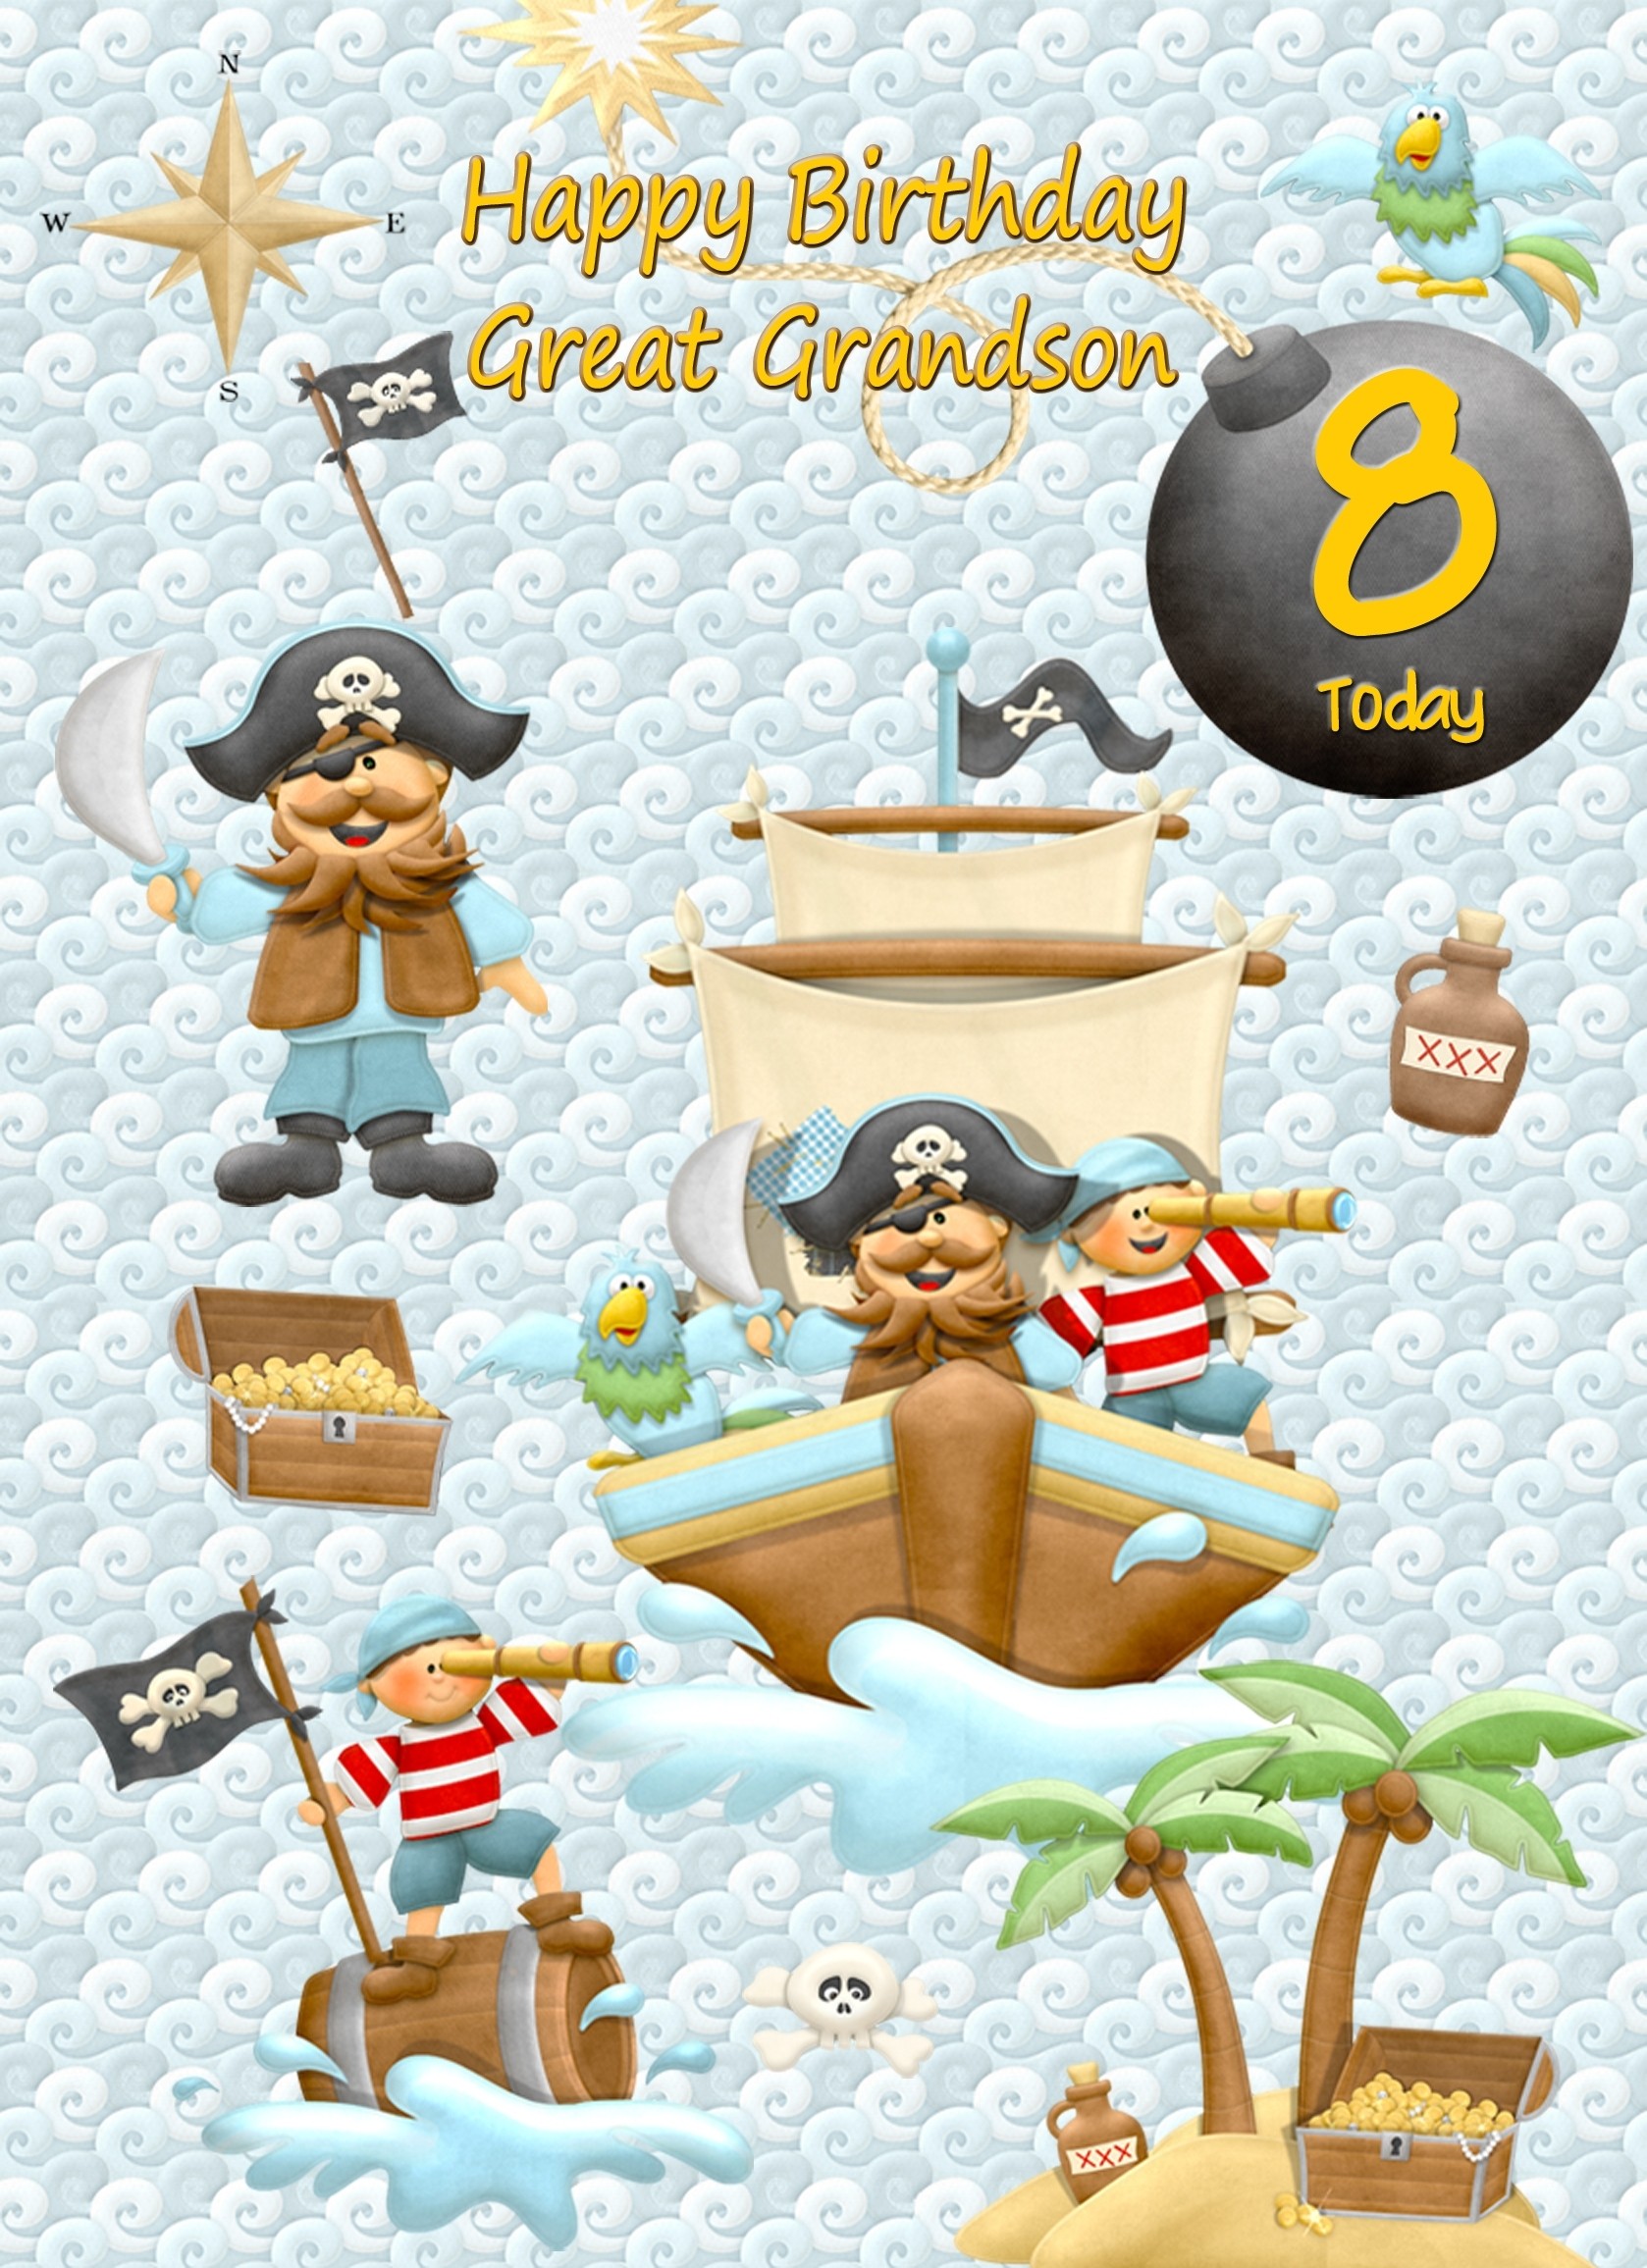 Kids 8th Birthday Pirate Cartoon Card for Great Grandson